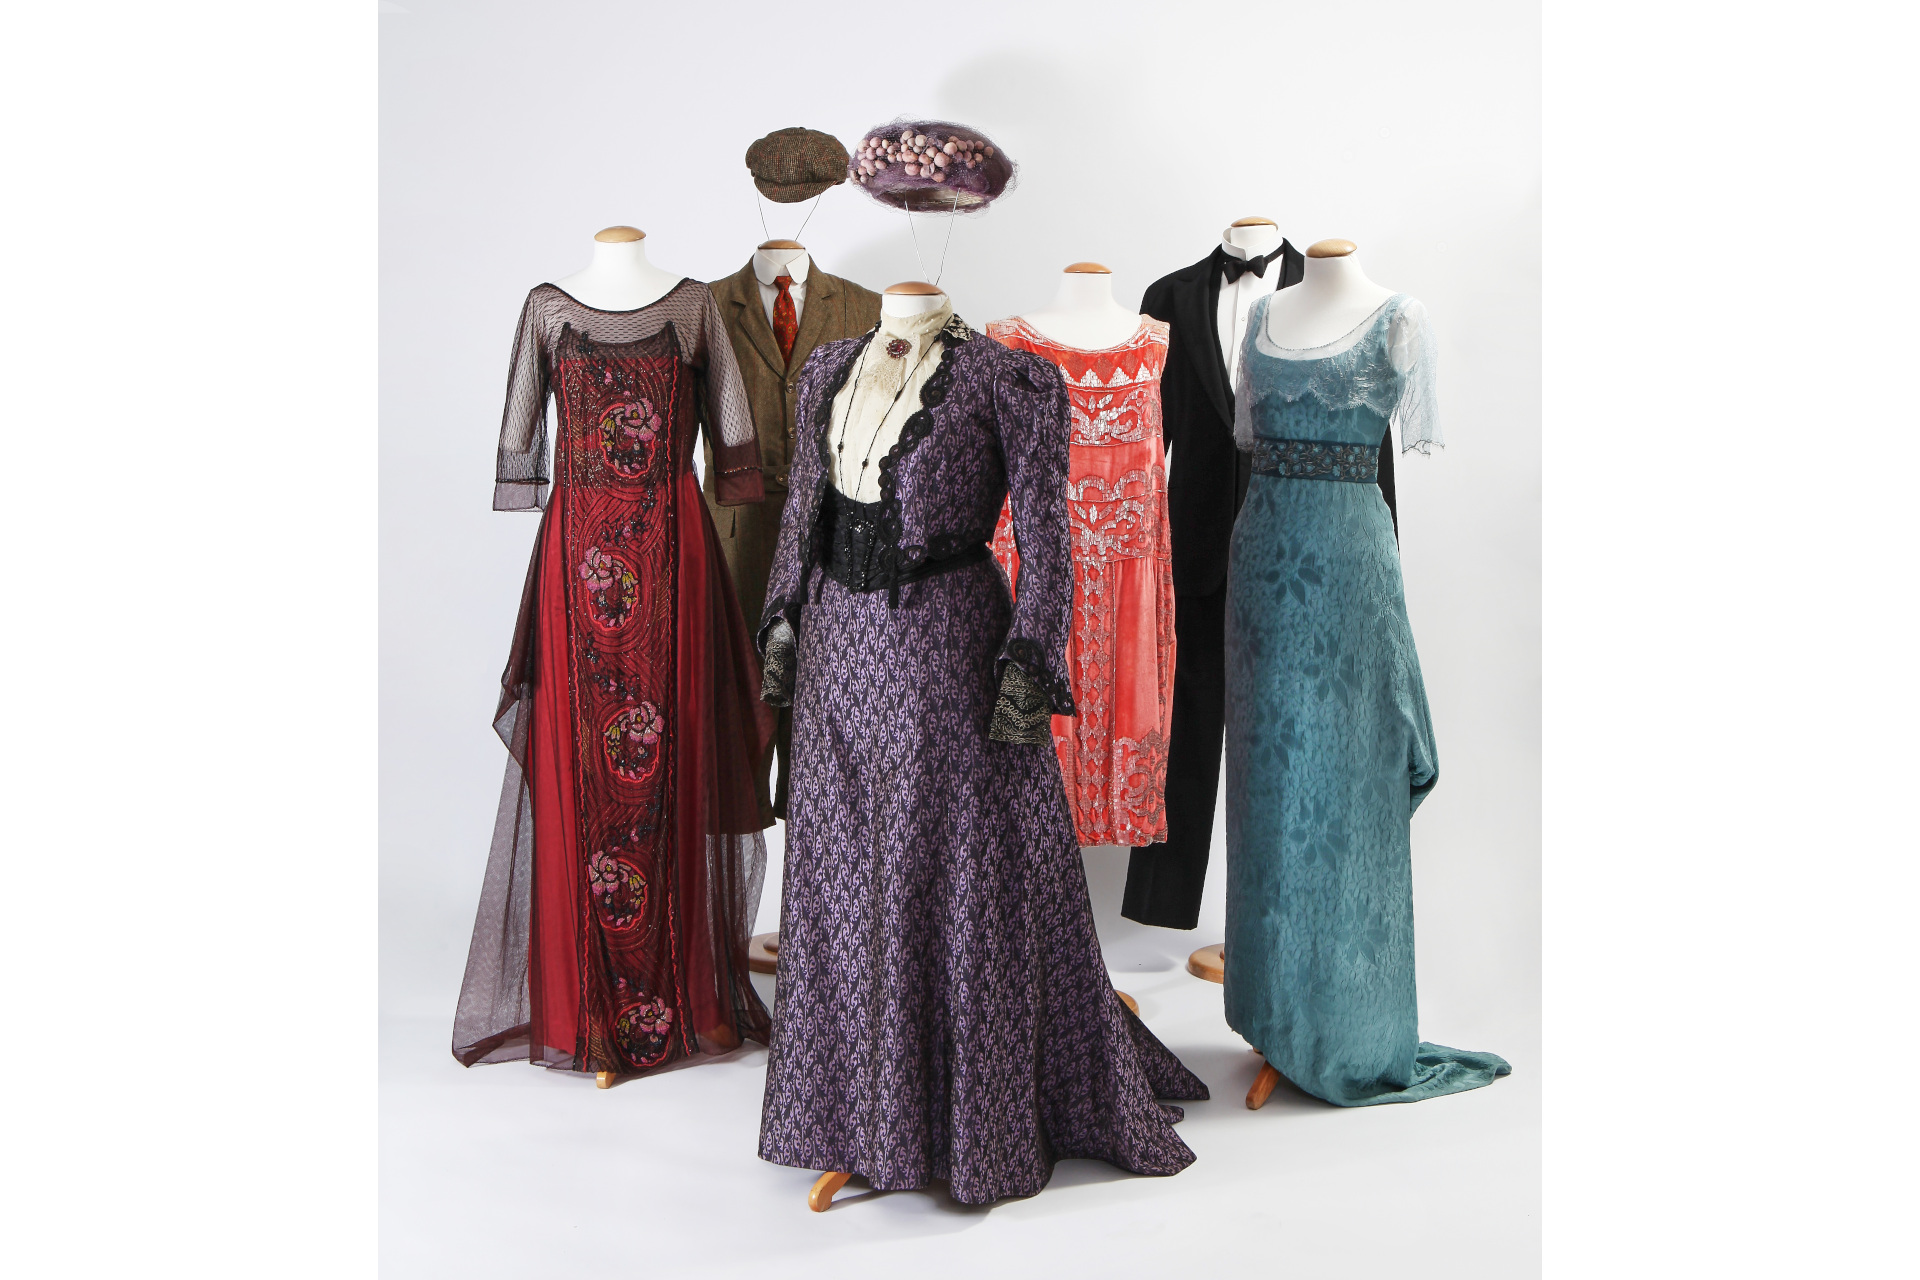 Downton Abbey costumes for Lights Camera Auction